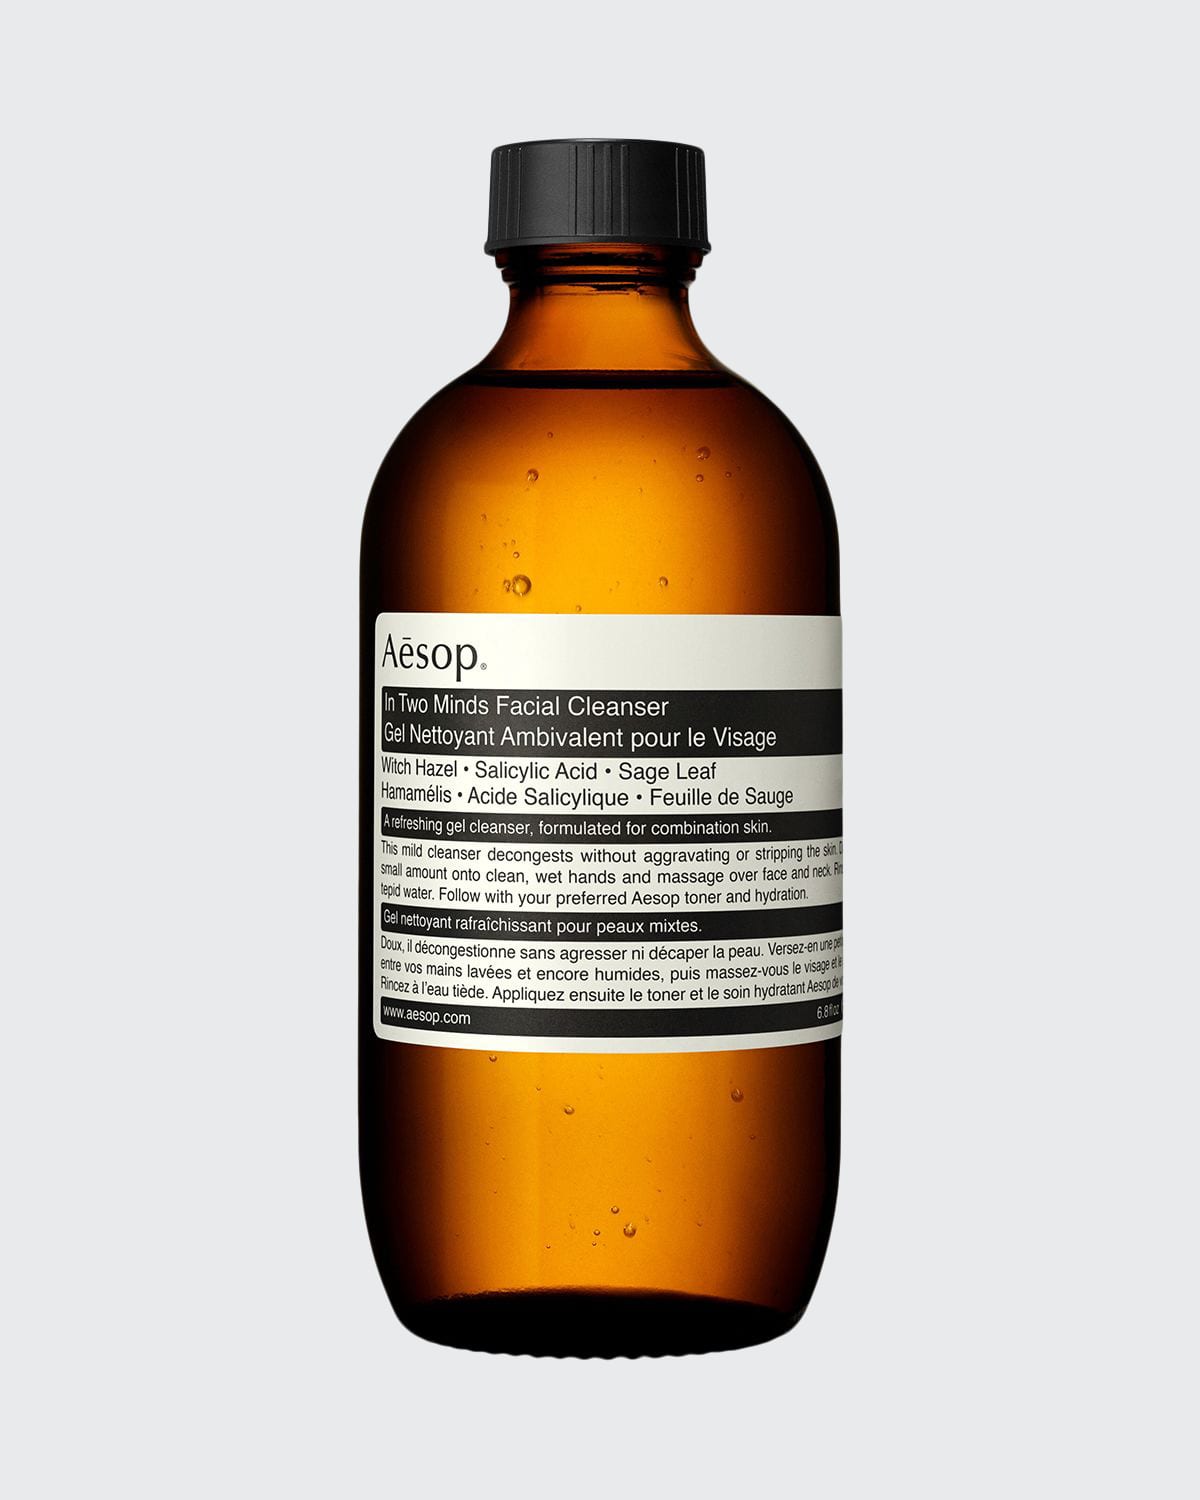 Aesop 6.7 oz. In Two Minds Facial Cleanser